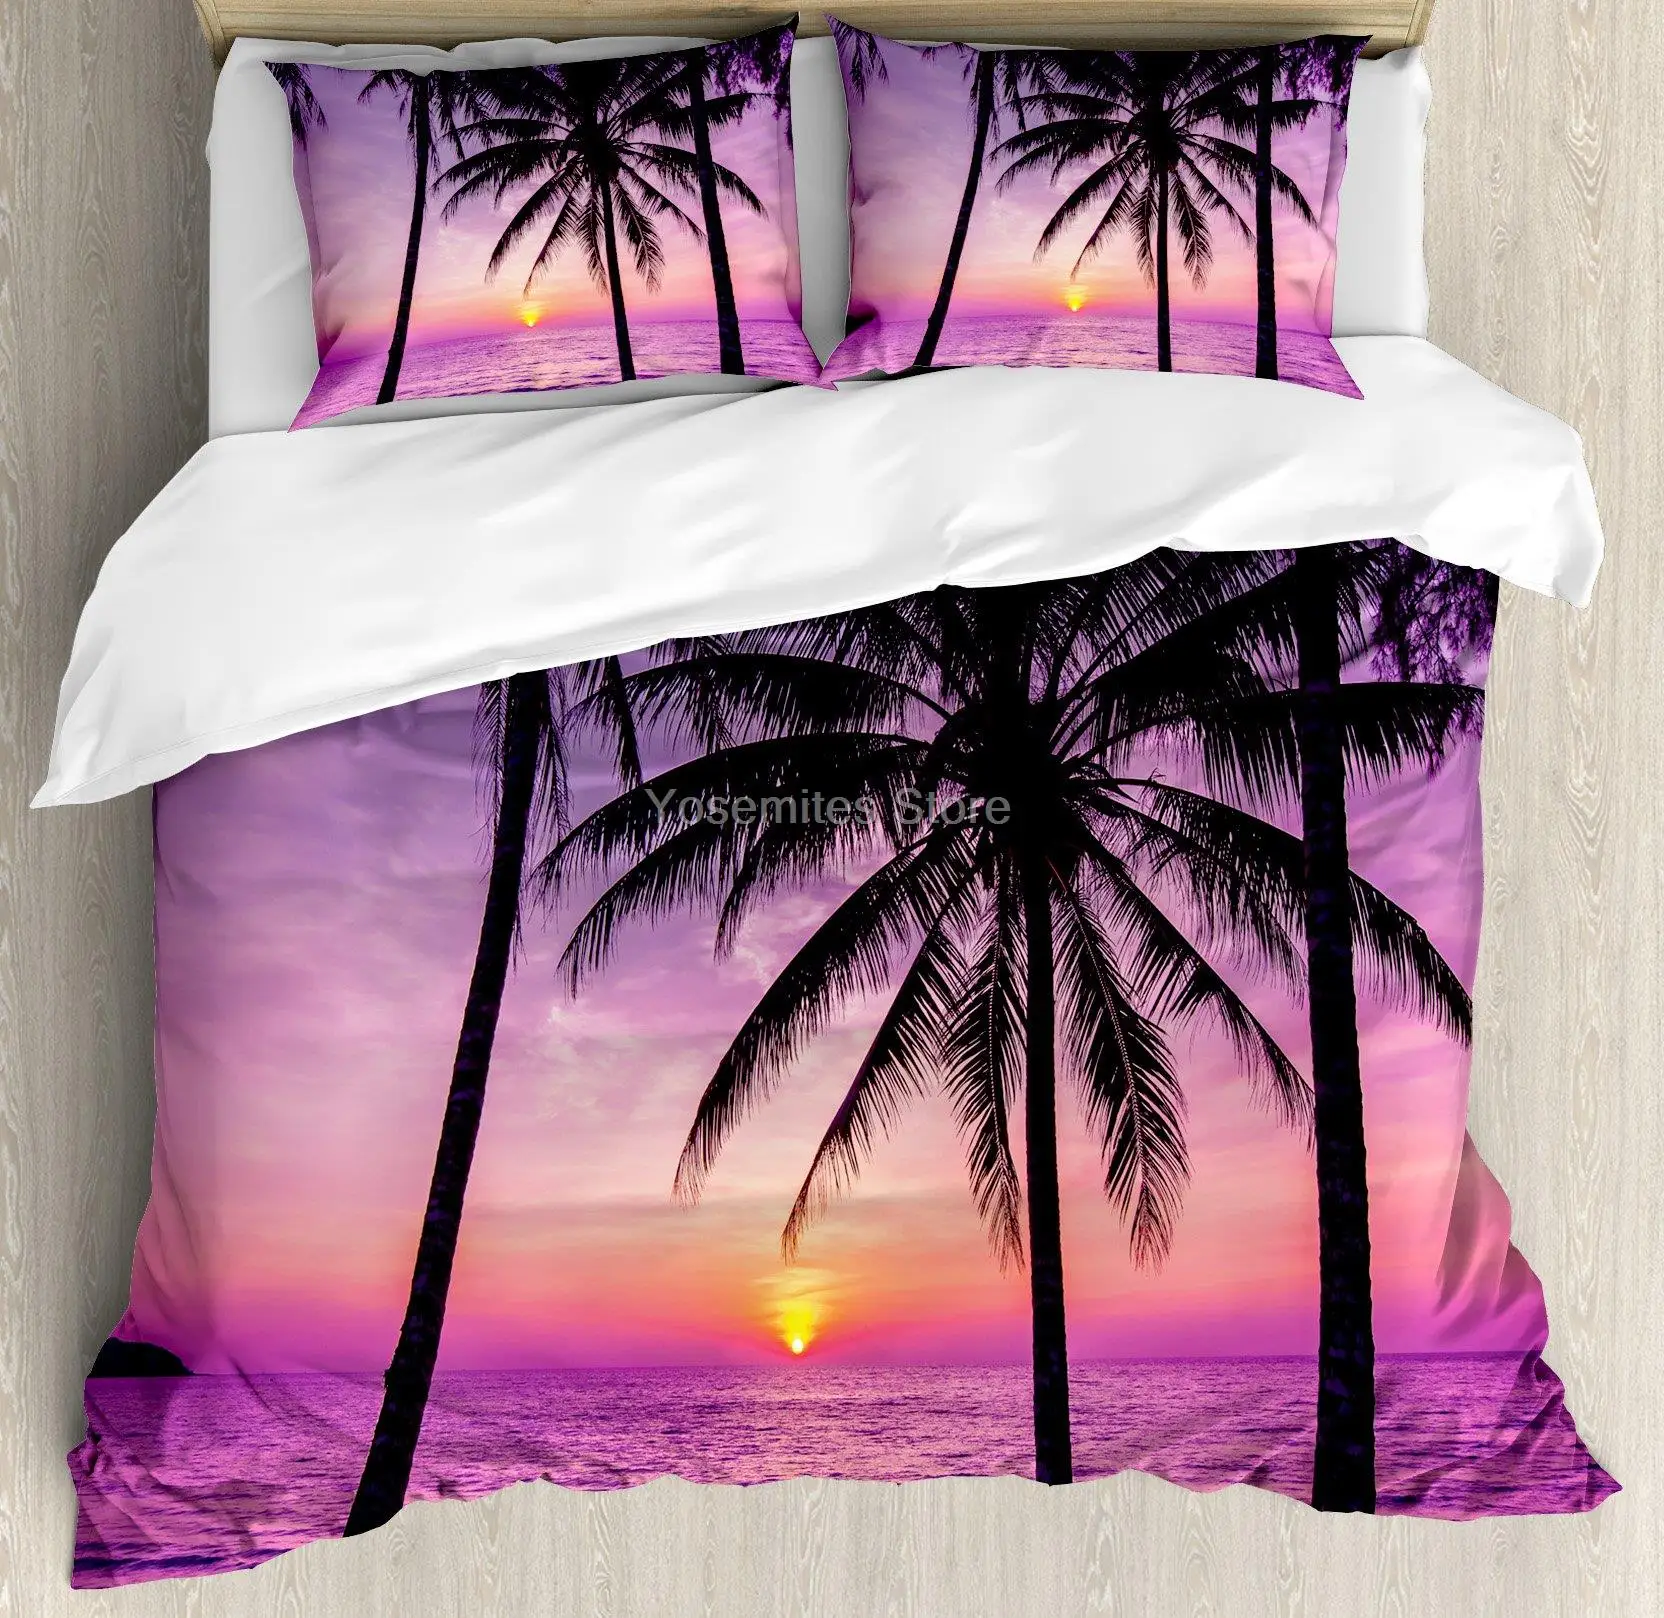 

Ocean Duvet Cover Set, Palm Trees Silhouette at Sunset Dreamy Dusk Warm Exotic Twilight Scenery Image, Decorative 3 Piece Beddi